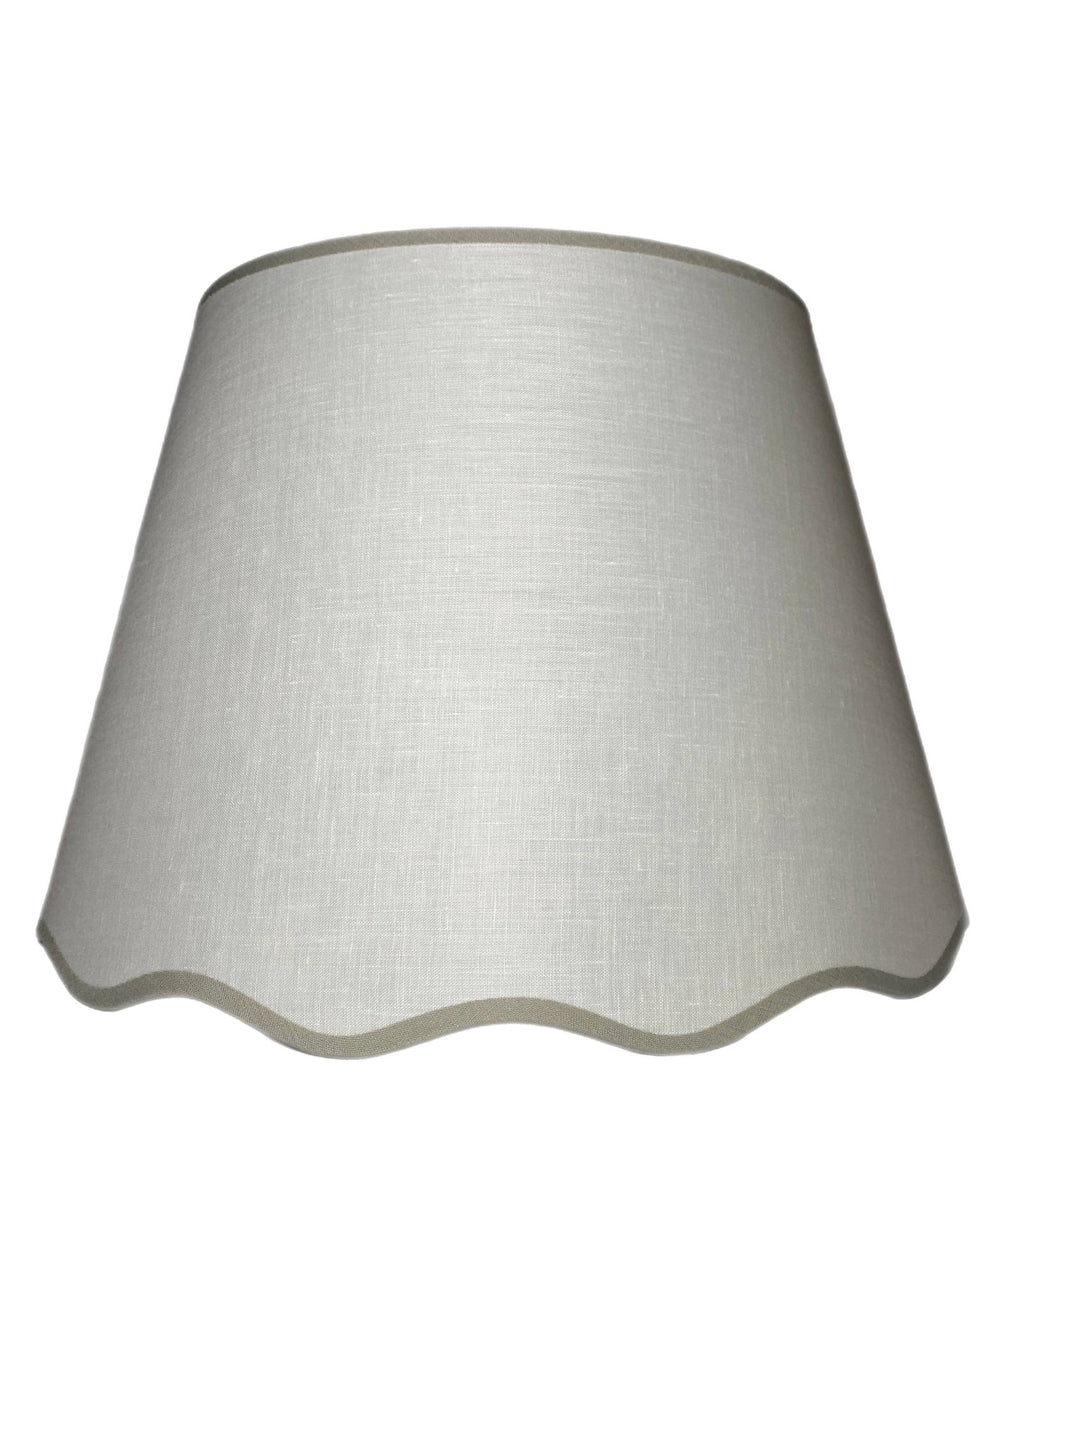 New Product Drops - Lux Lamp Shades